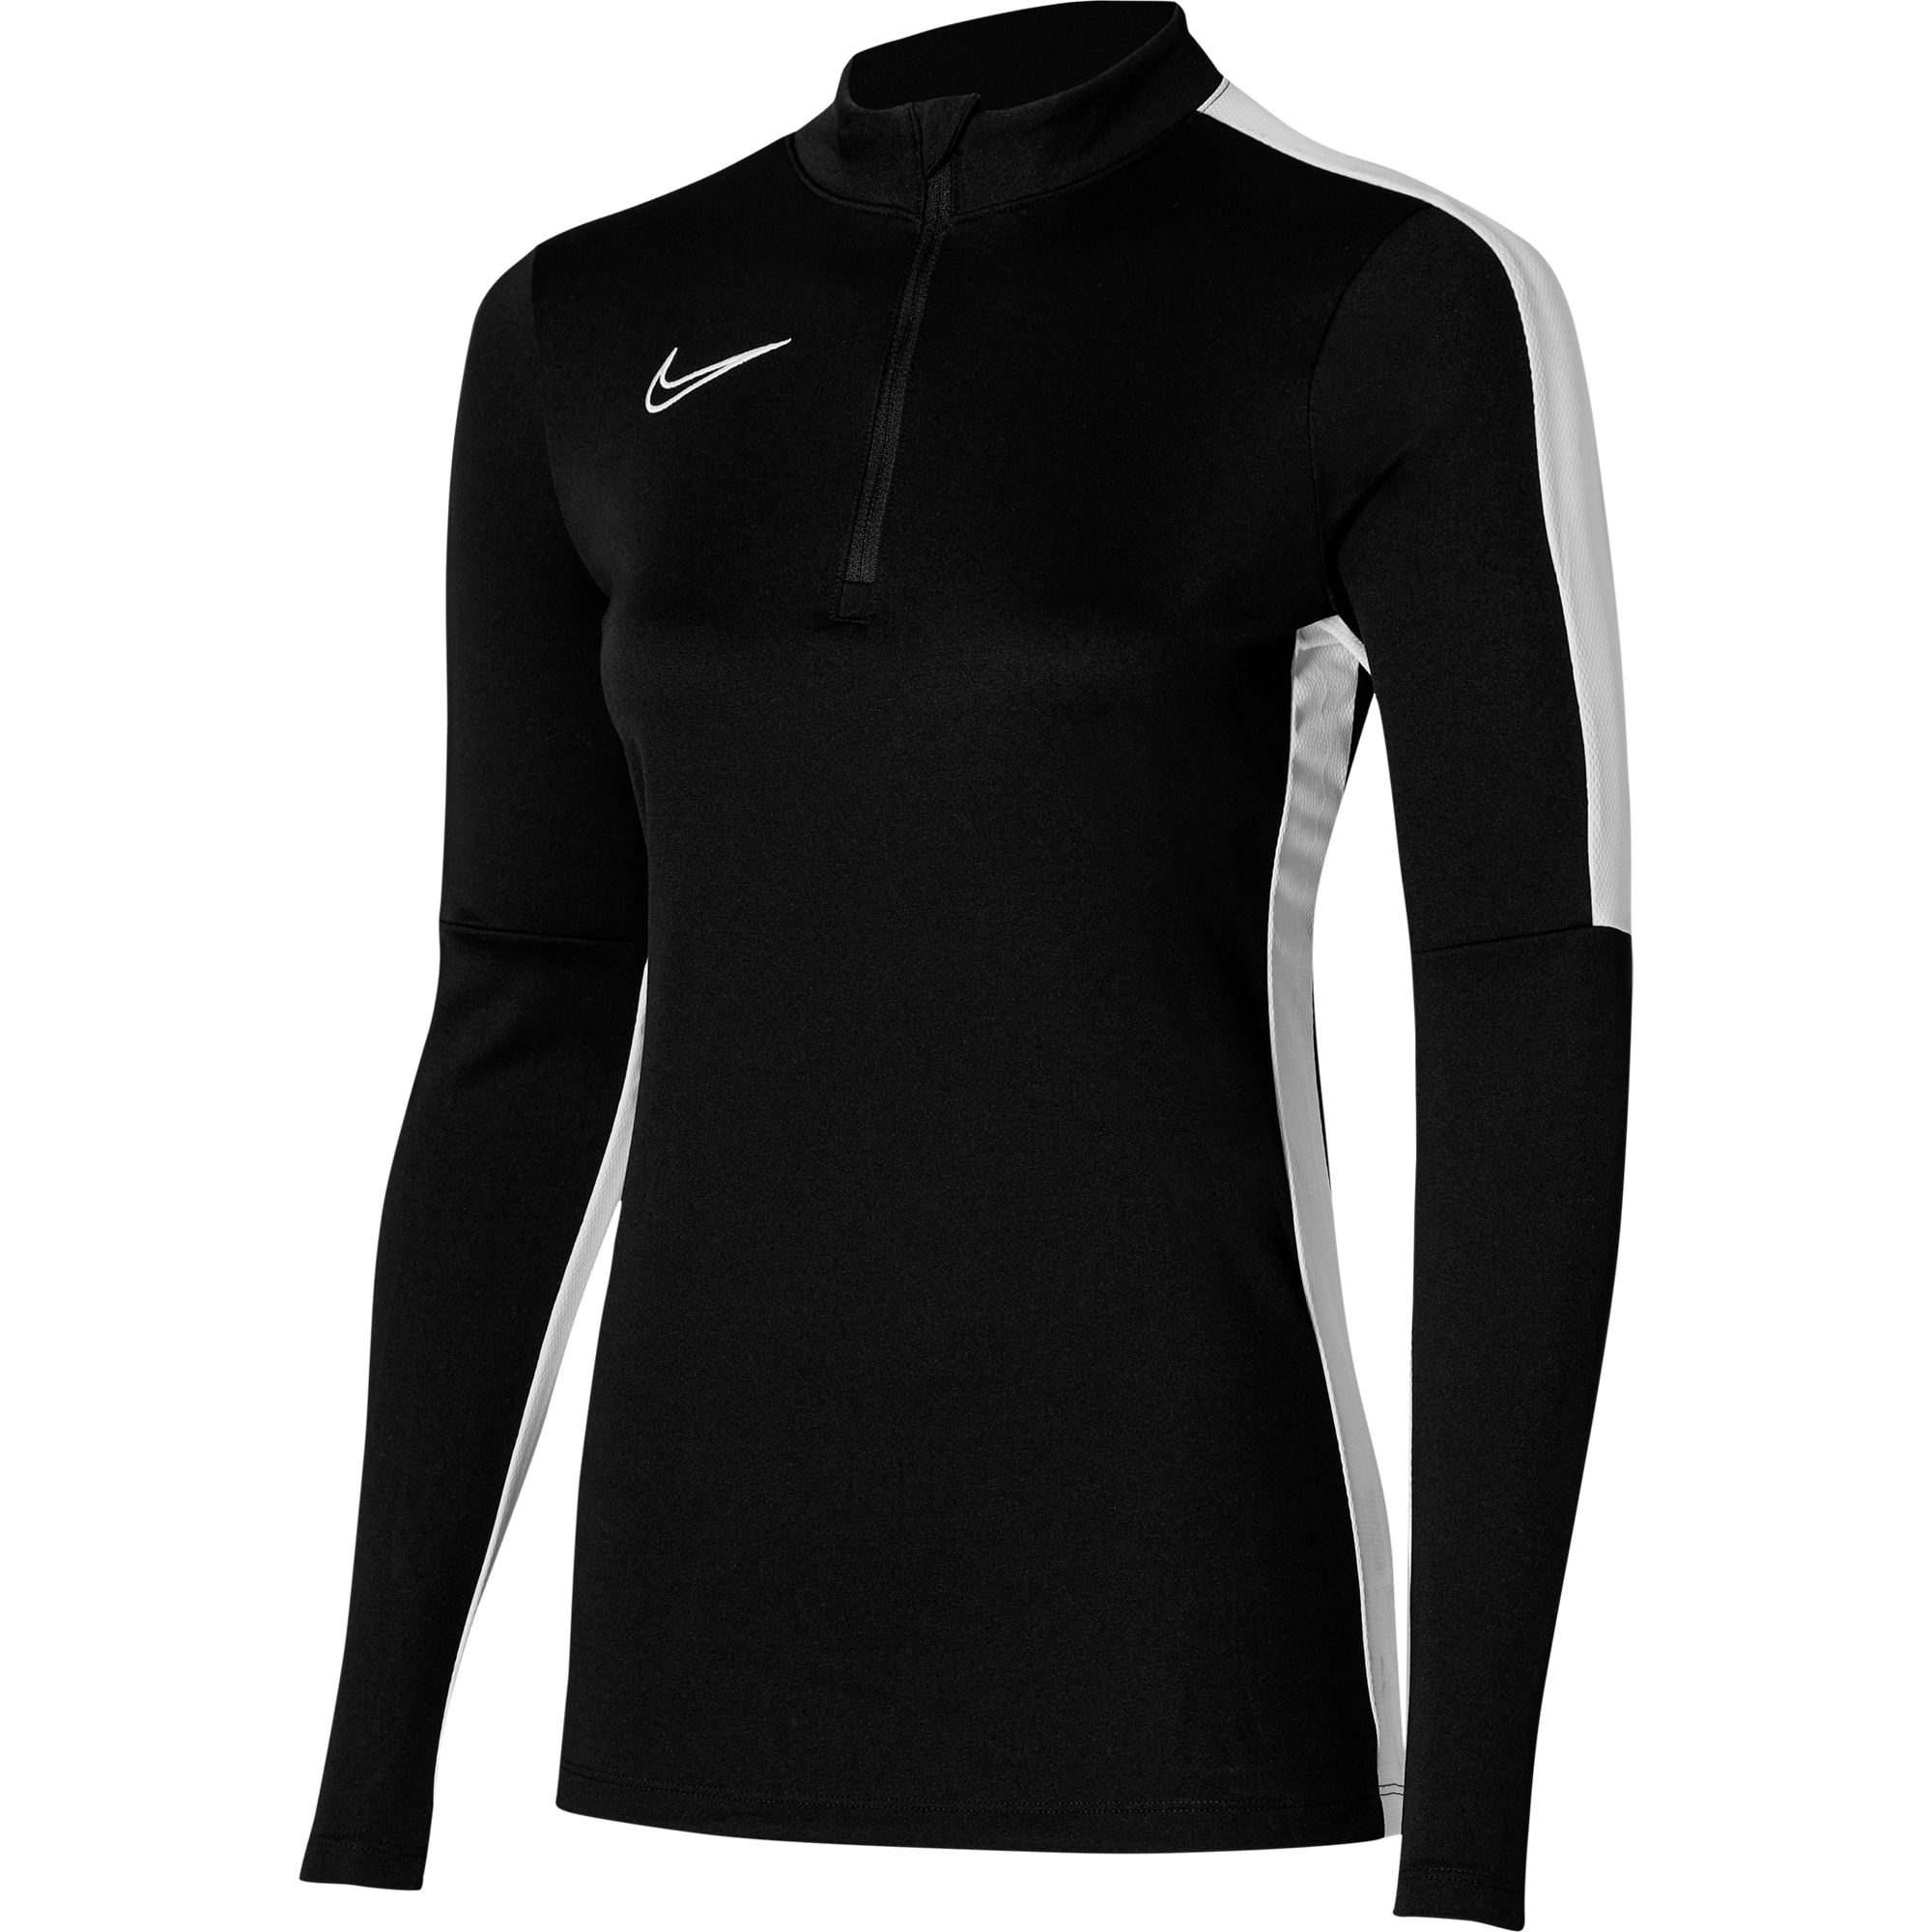 Clifton All Whites - Women's Academy 23 Drill Top